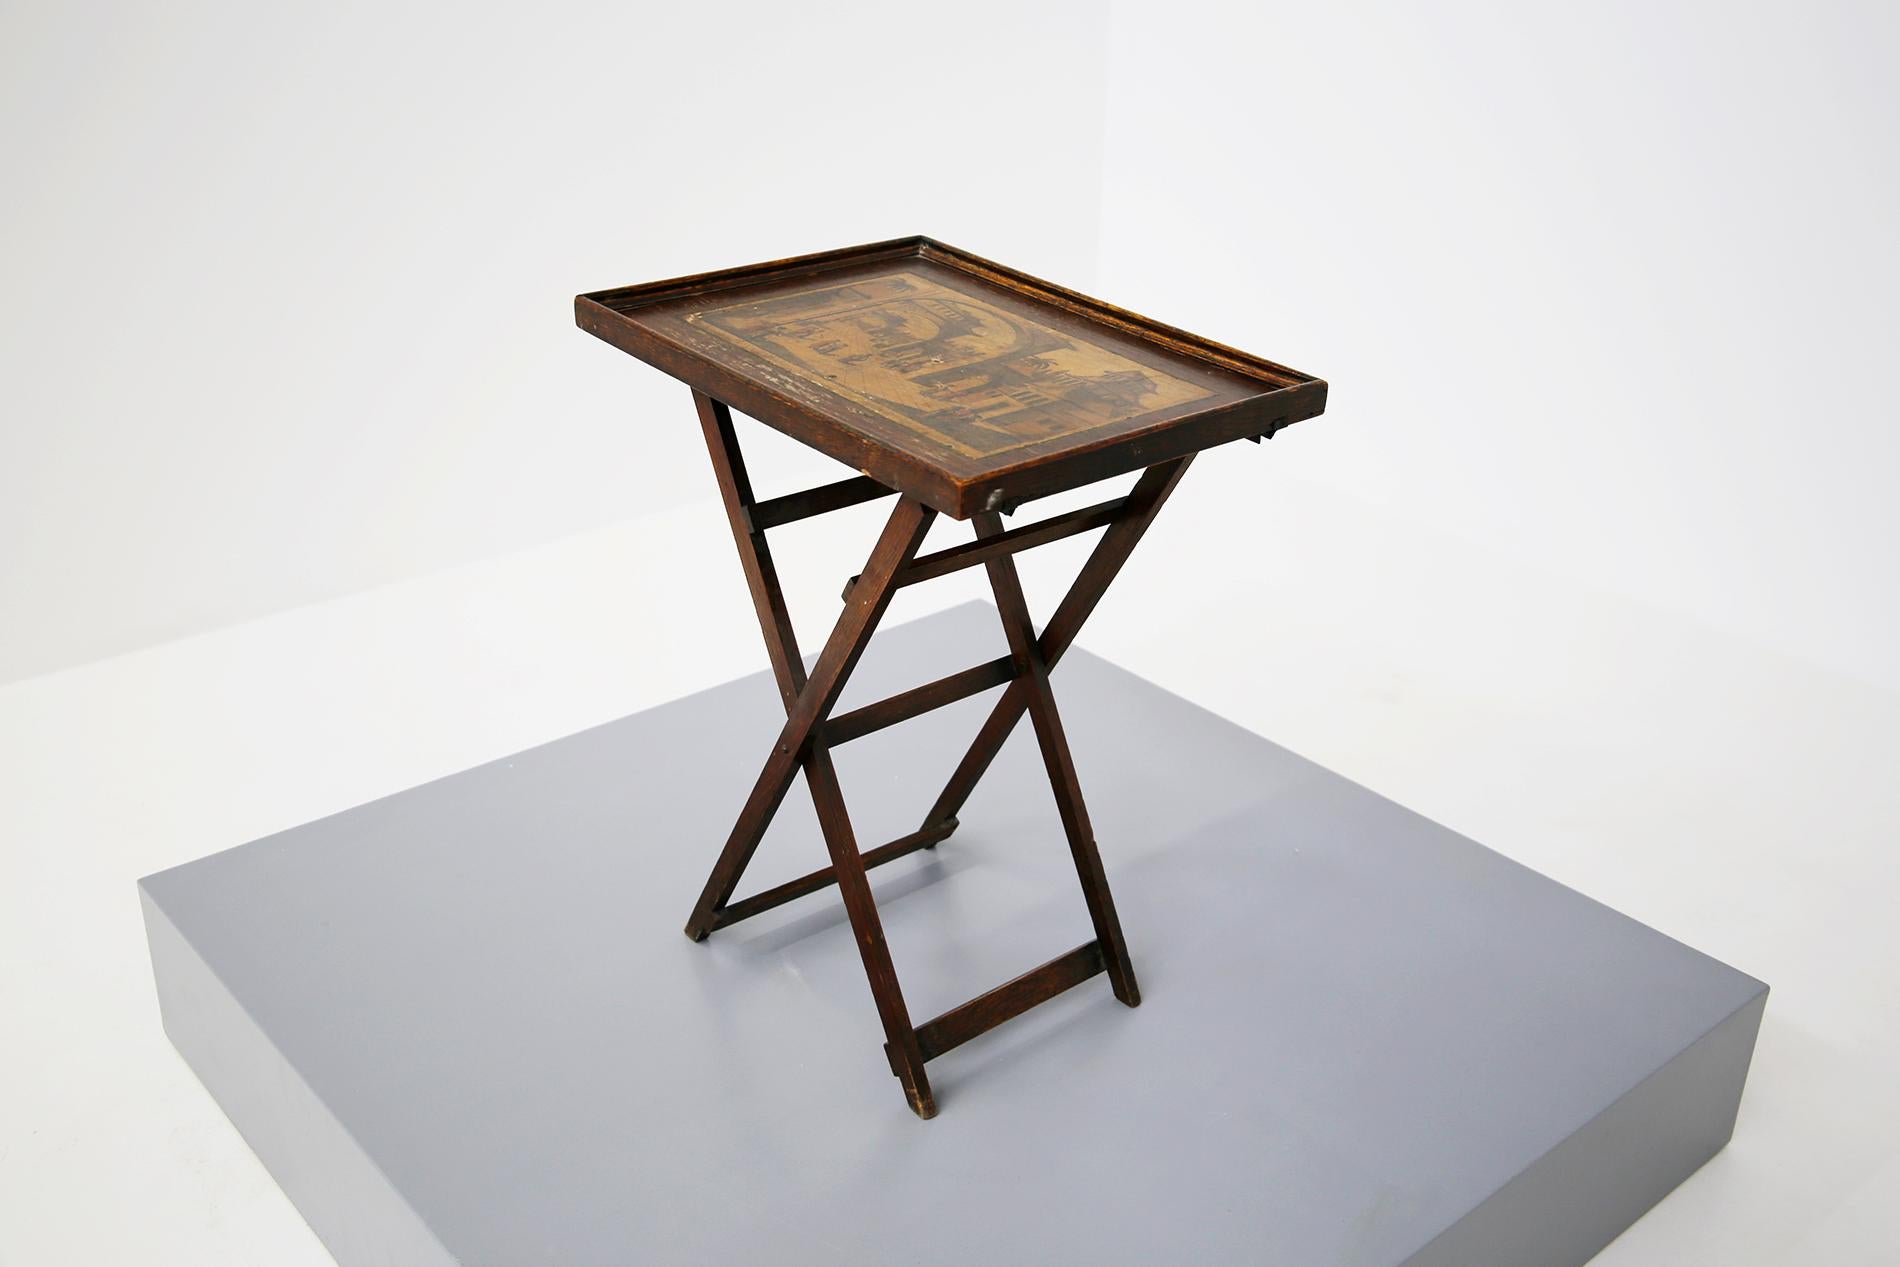 Foldable coffee table with refined Imperial Chinese collection des prospects, 19th century .The coffee table is made of walnut wood. The coffee table through a mechanism is
lockable. In his table there is a refined chalcography representing a scene